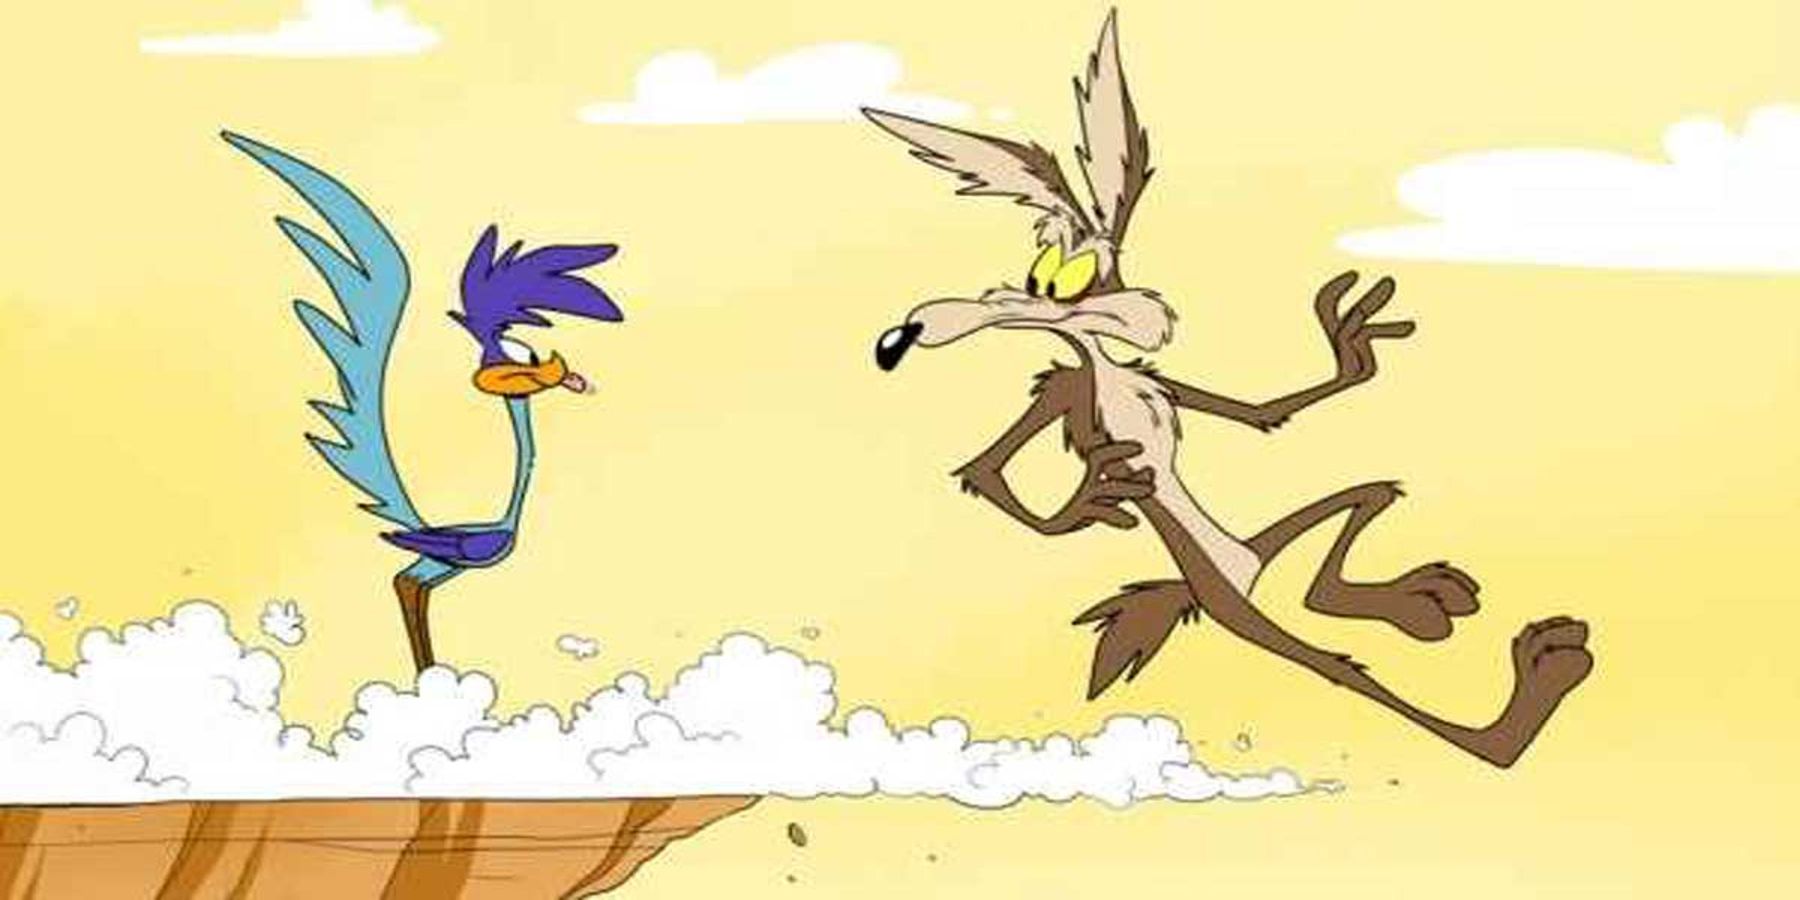 Looney Tunes Wile E. Coyote and Road Runner